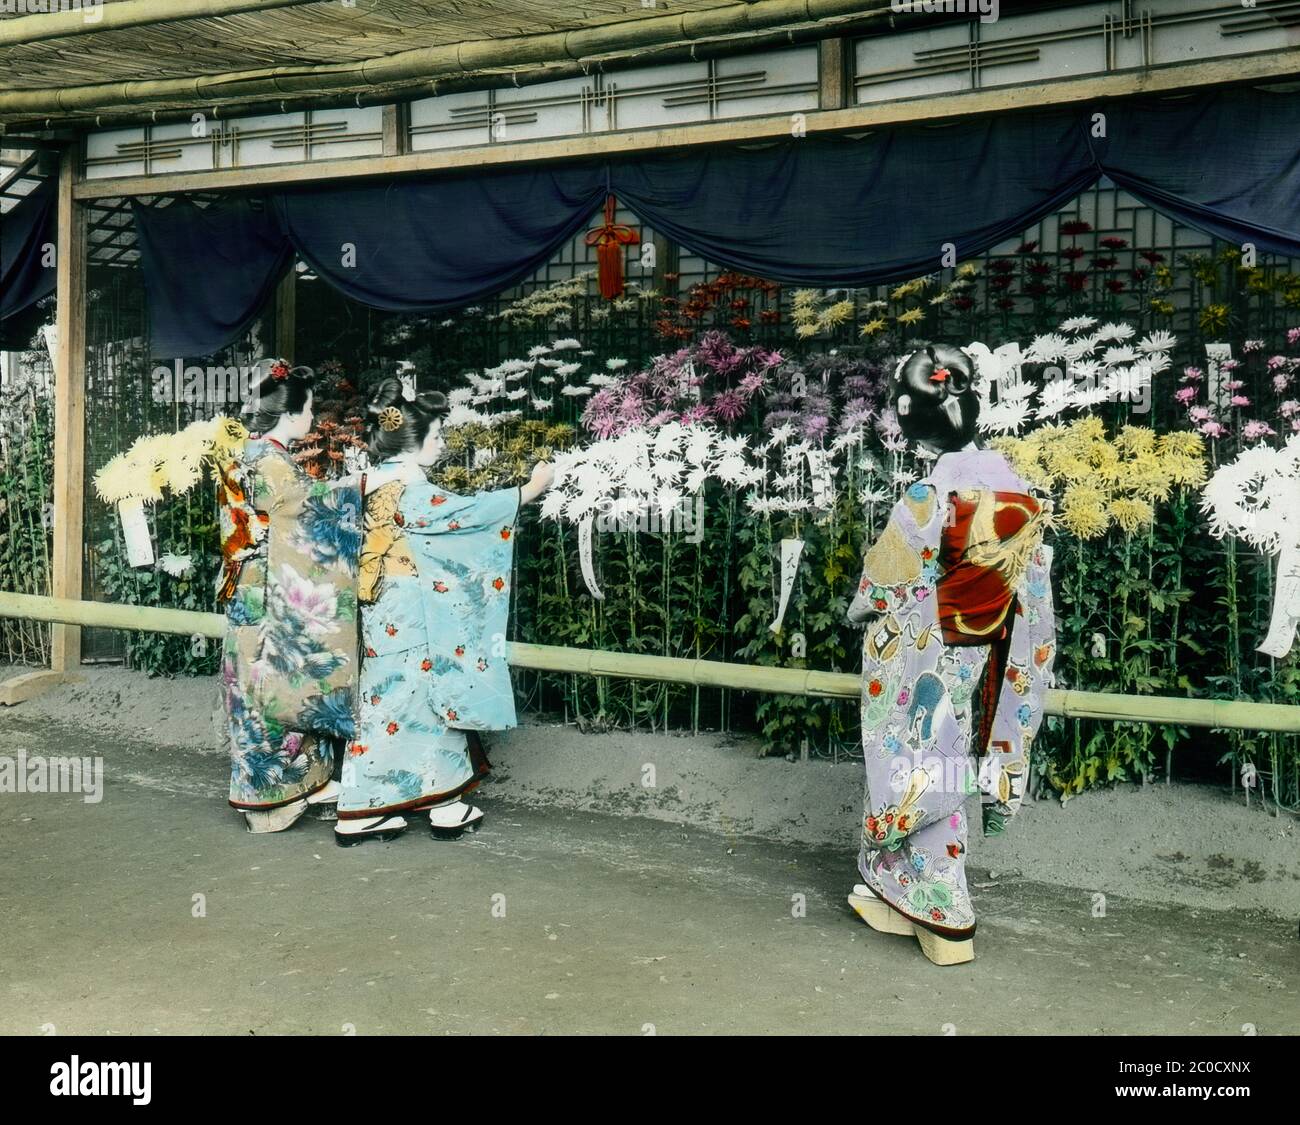 [ 1900s Japan - Chrysanthemum Exposition ] — Three young women admire flowers at a chrysanthemum exposition (菊花展) in Yokohama, Kanagawa Prefecture.  The private garden was on the grounds of a villa in Nogeyama owned by a rich merchant family.  Twice a year, the garden was opened to the public and people would line up to admire the plum blossom in spring and the chrysanthemums in autumn.  20th century vintage glass slide. Stock Photo